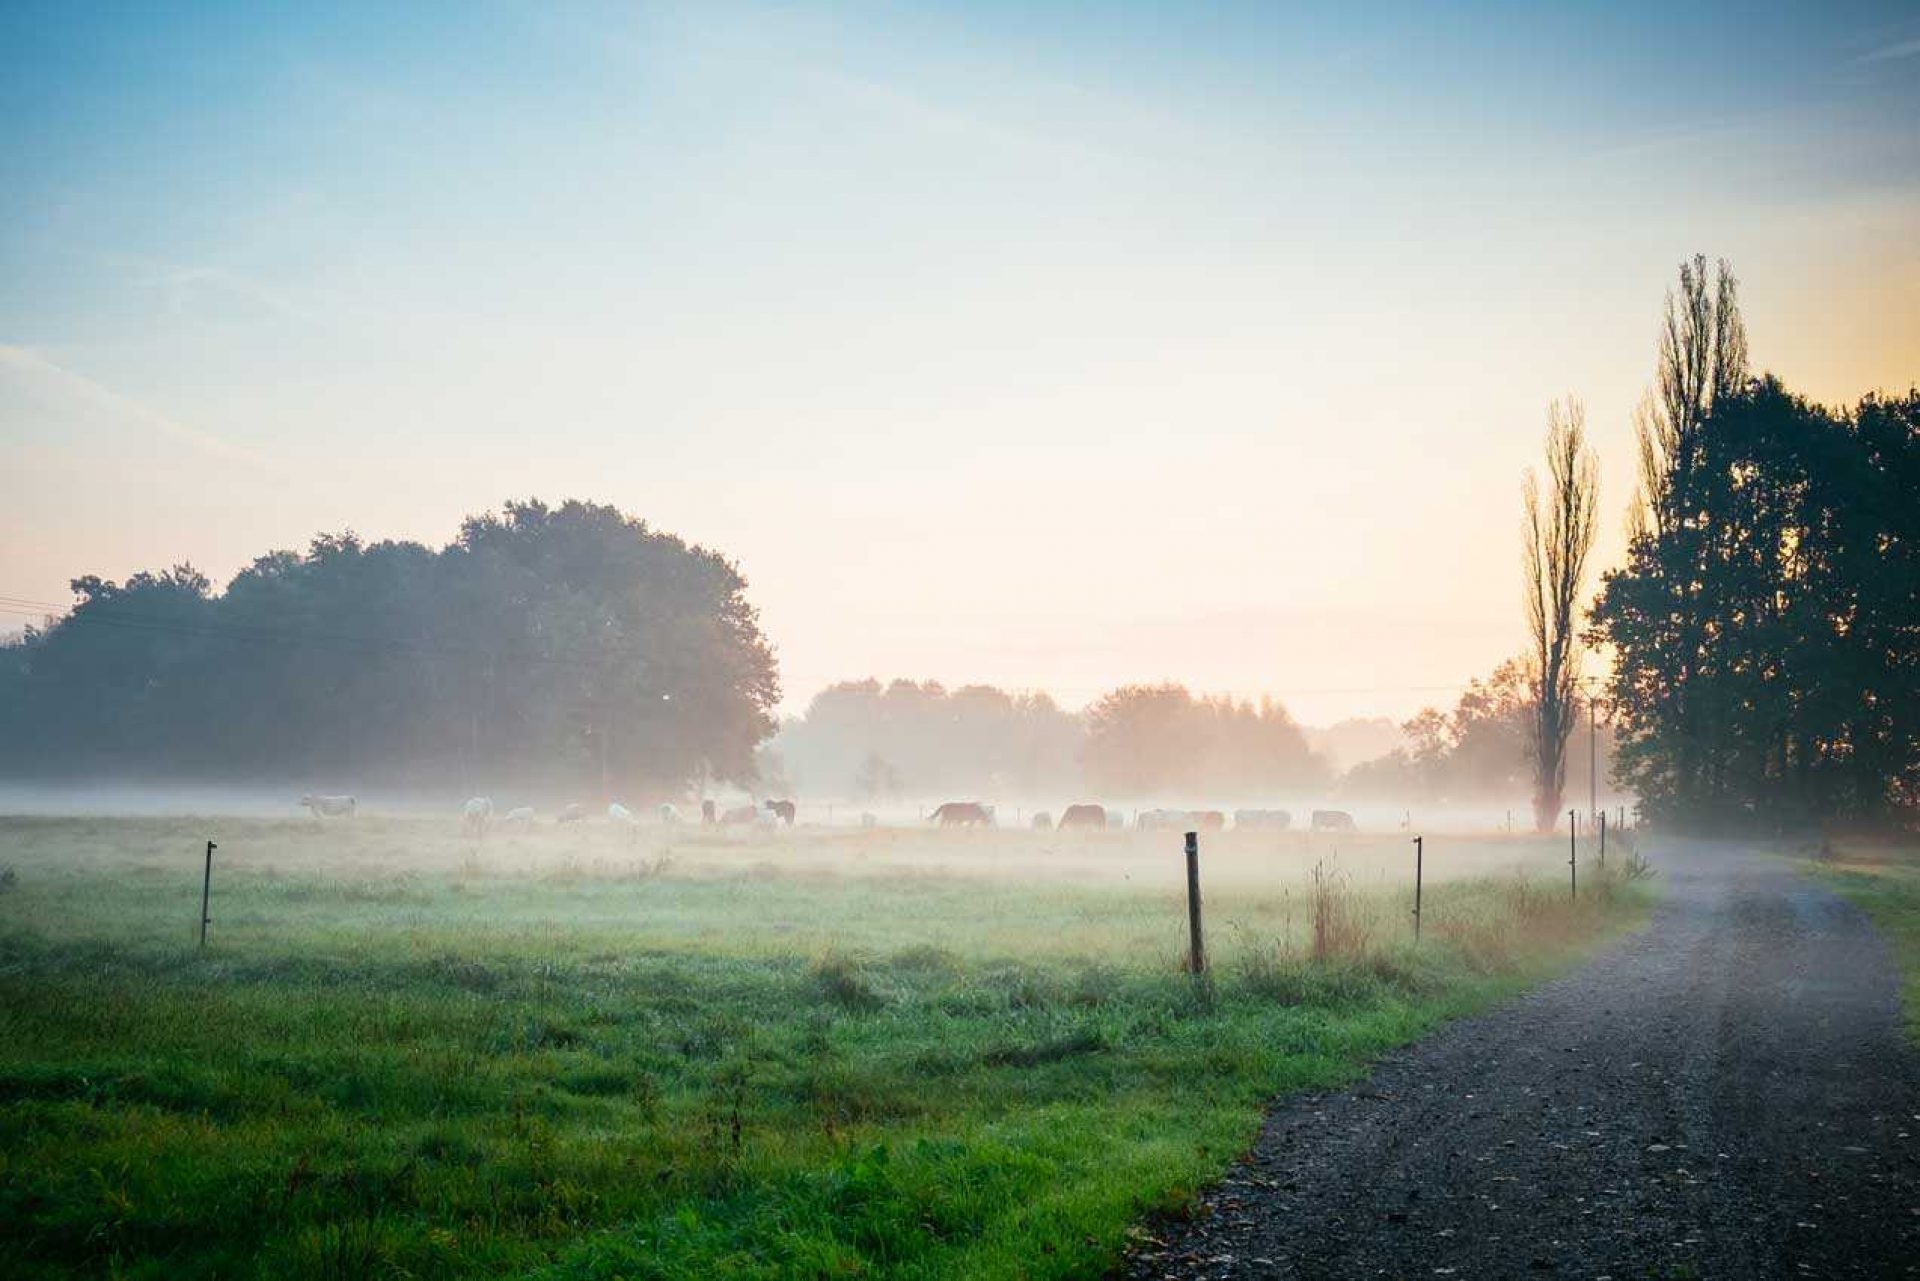 Far-off group of cows in field at dawn with fog on the ground